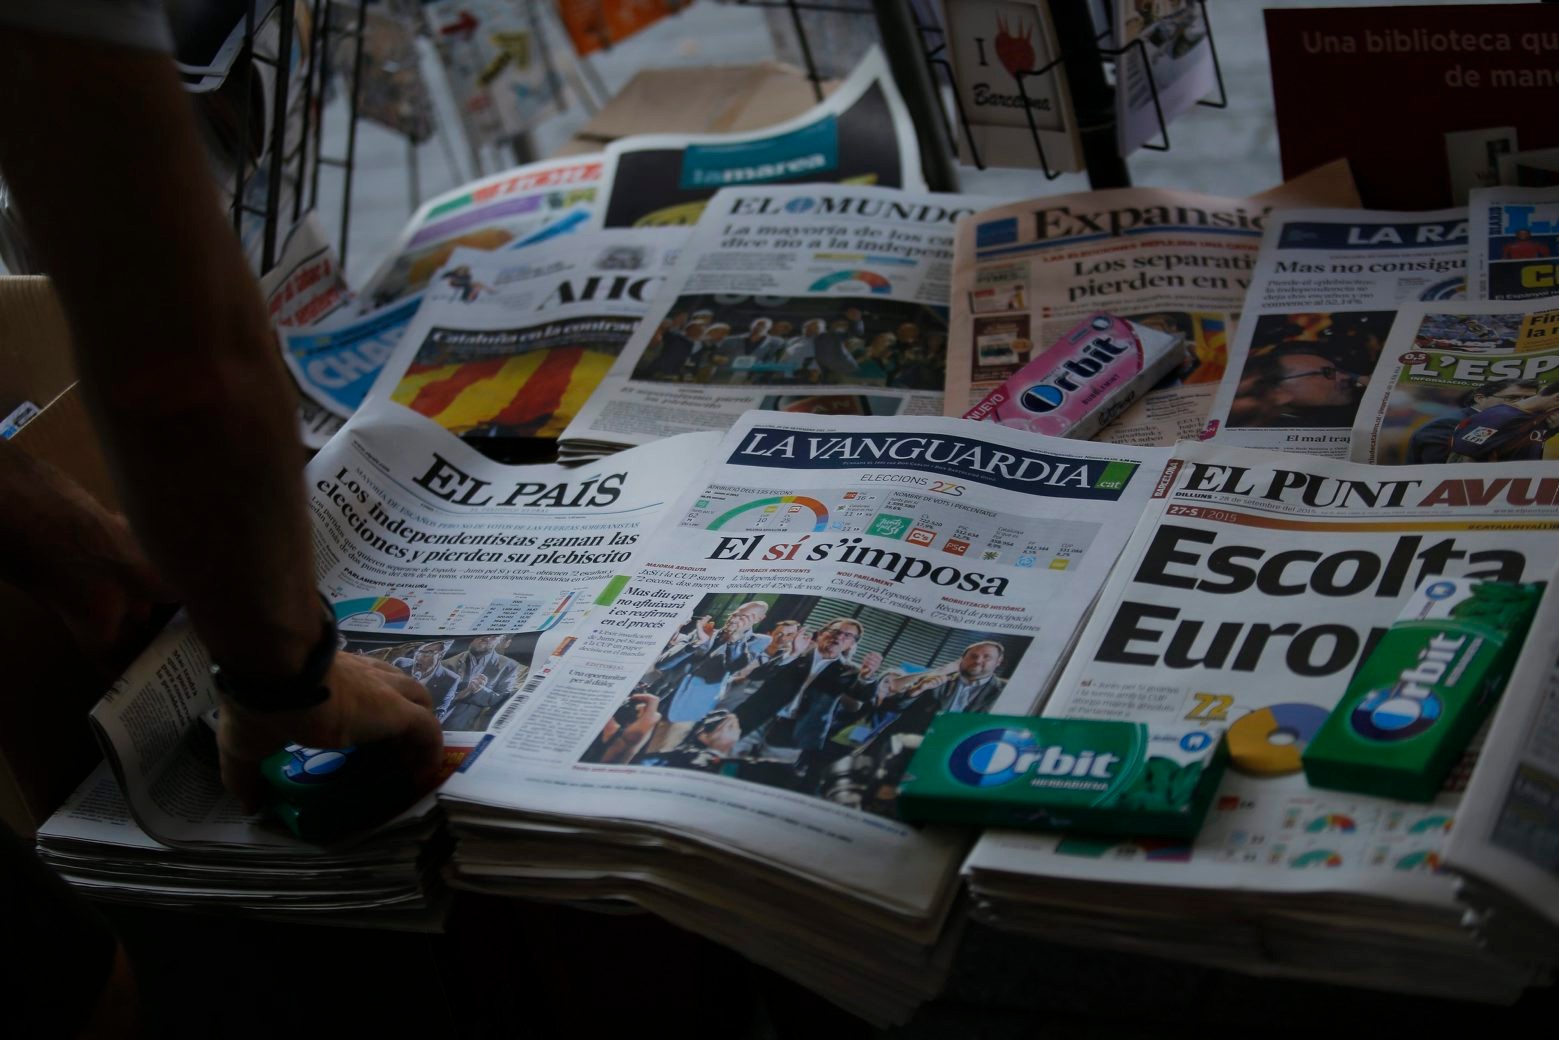 Newspapers with photographs of the President of Democratic Convergence of Catalonia Artur Mas, the president of the Esquerra Republicana de Catalunya Oriol Junqueras and the leader of the Catalan party "Junts pel si" Raul Romeva are laid out at a news kiosk in Barcelona, Spain, Monday, Sept. 28, 2015. Secessionist parties that want Catalonia to break away from Spain were set Monday to embark on tough political negotiations aimed at giving them a majority in the regional parliament so they can push forward an independence plan. (AP Photo/Francisco Seco) Spain Catalonia Independence